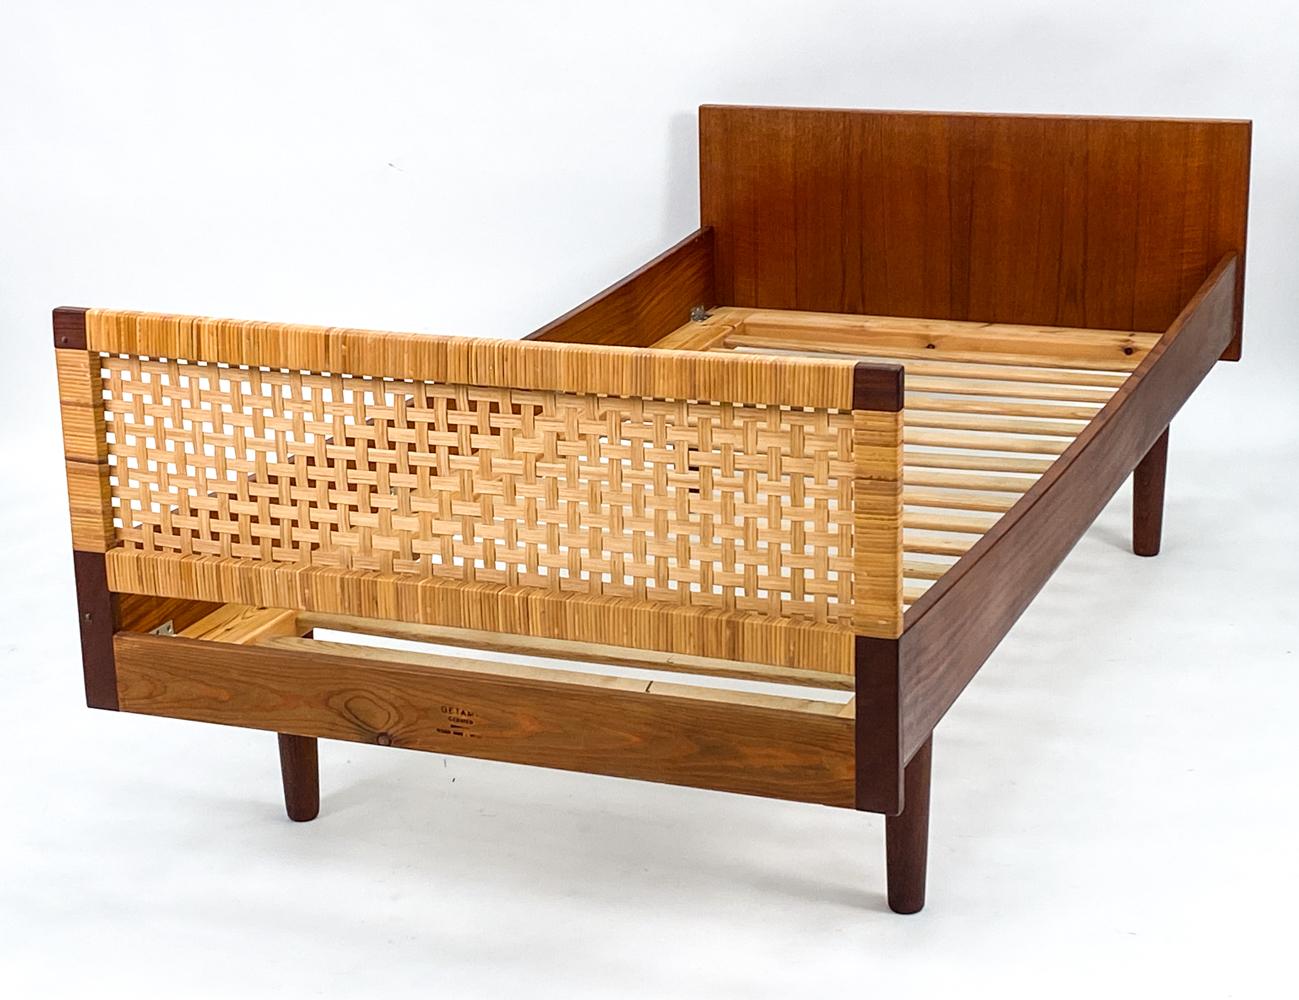 A fabulous Danish mid-century daybed in teak with a caned headboard or footboard, designed by Hans Wegner for GETAMA. With GETAMA stamp to one rail. This fun piece features slat supports for a custom cushion to be used as a daybed or for a custom